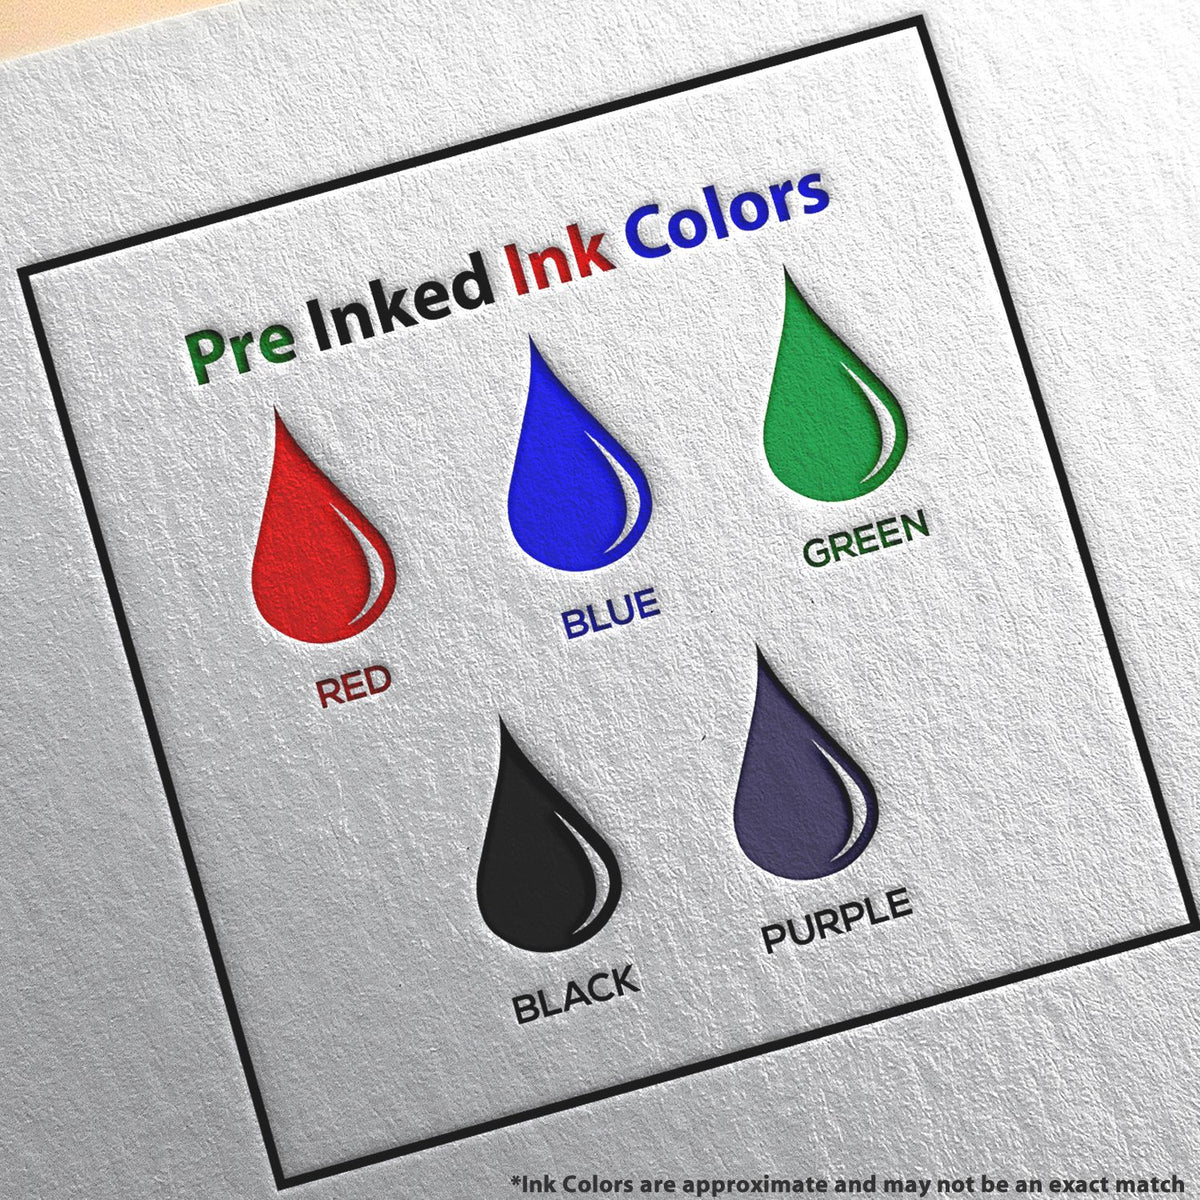 A picture showing the different ink colors or hues available for the Slim Pre-Inked Colorado Professional Engineer Seal Stamp product.